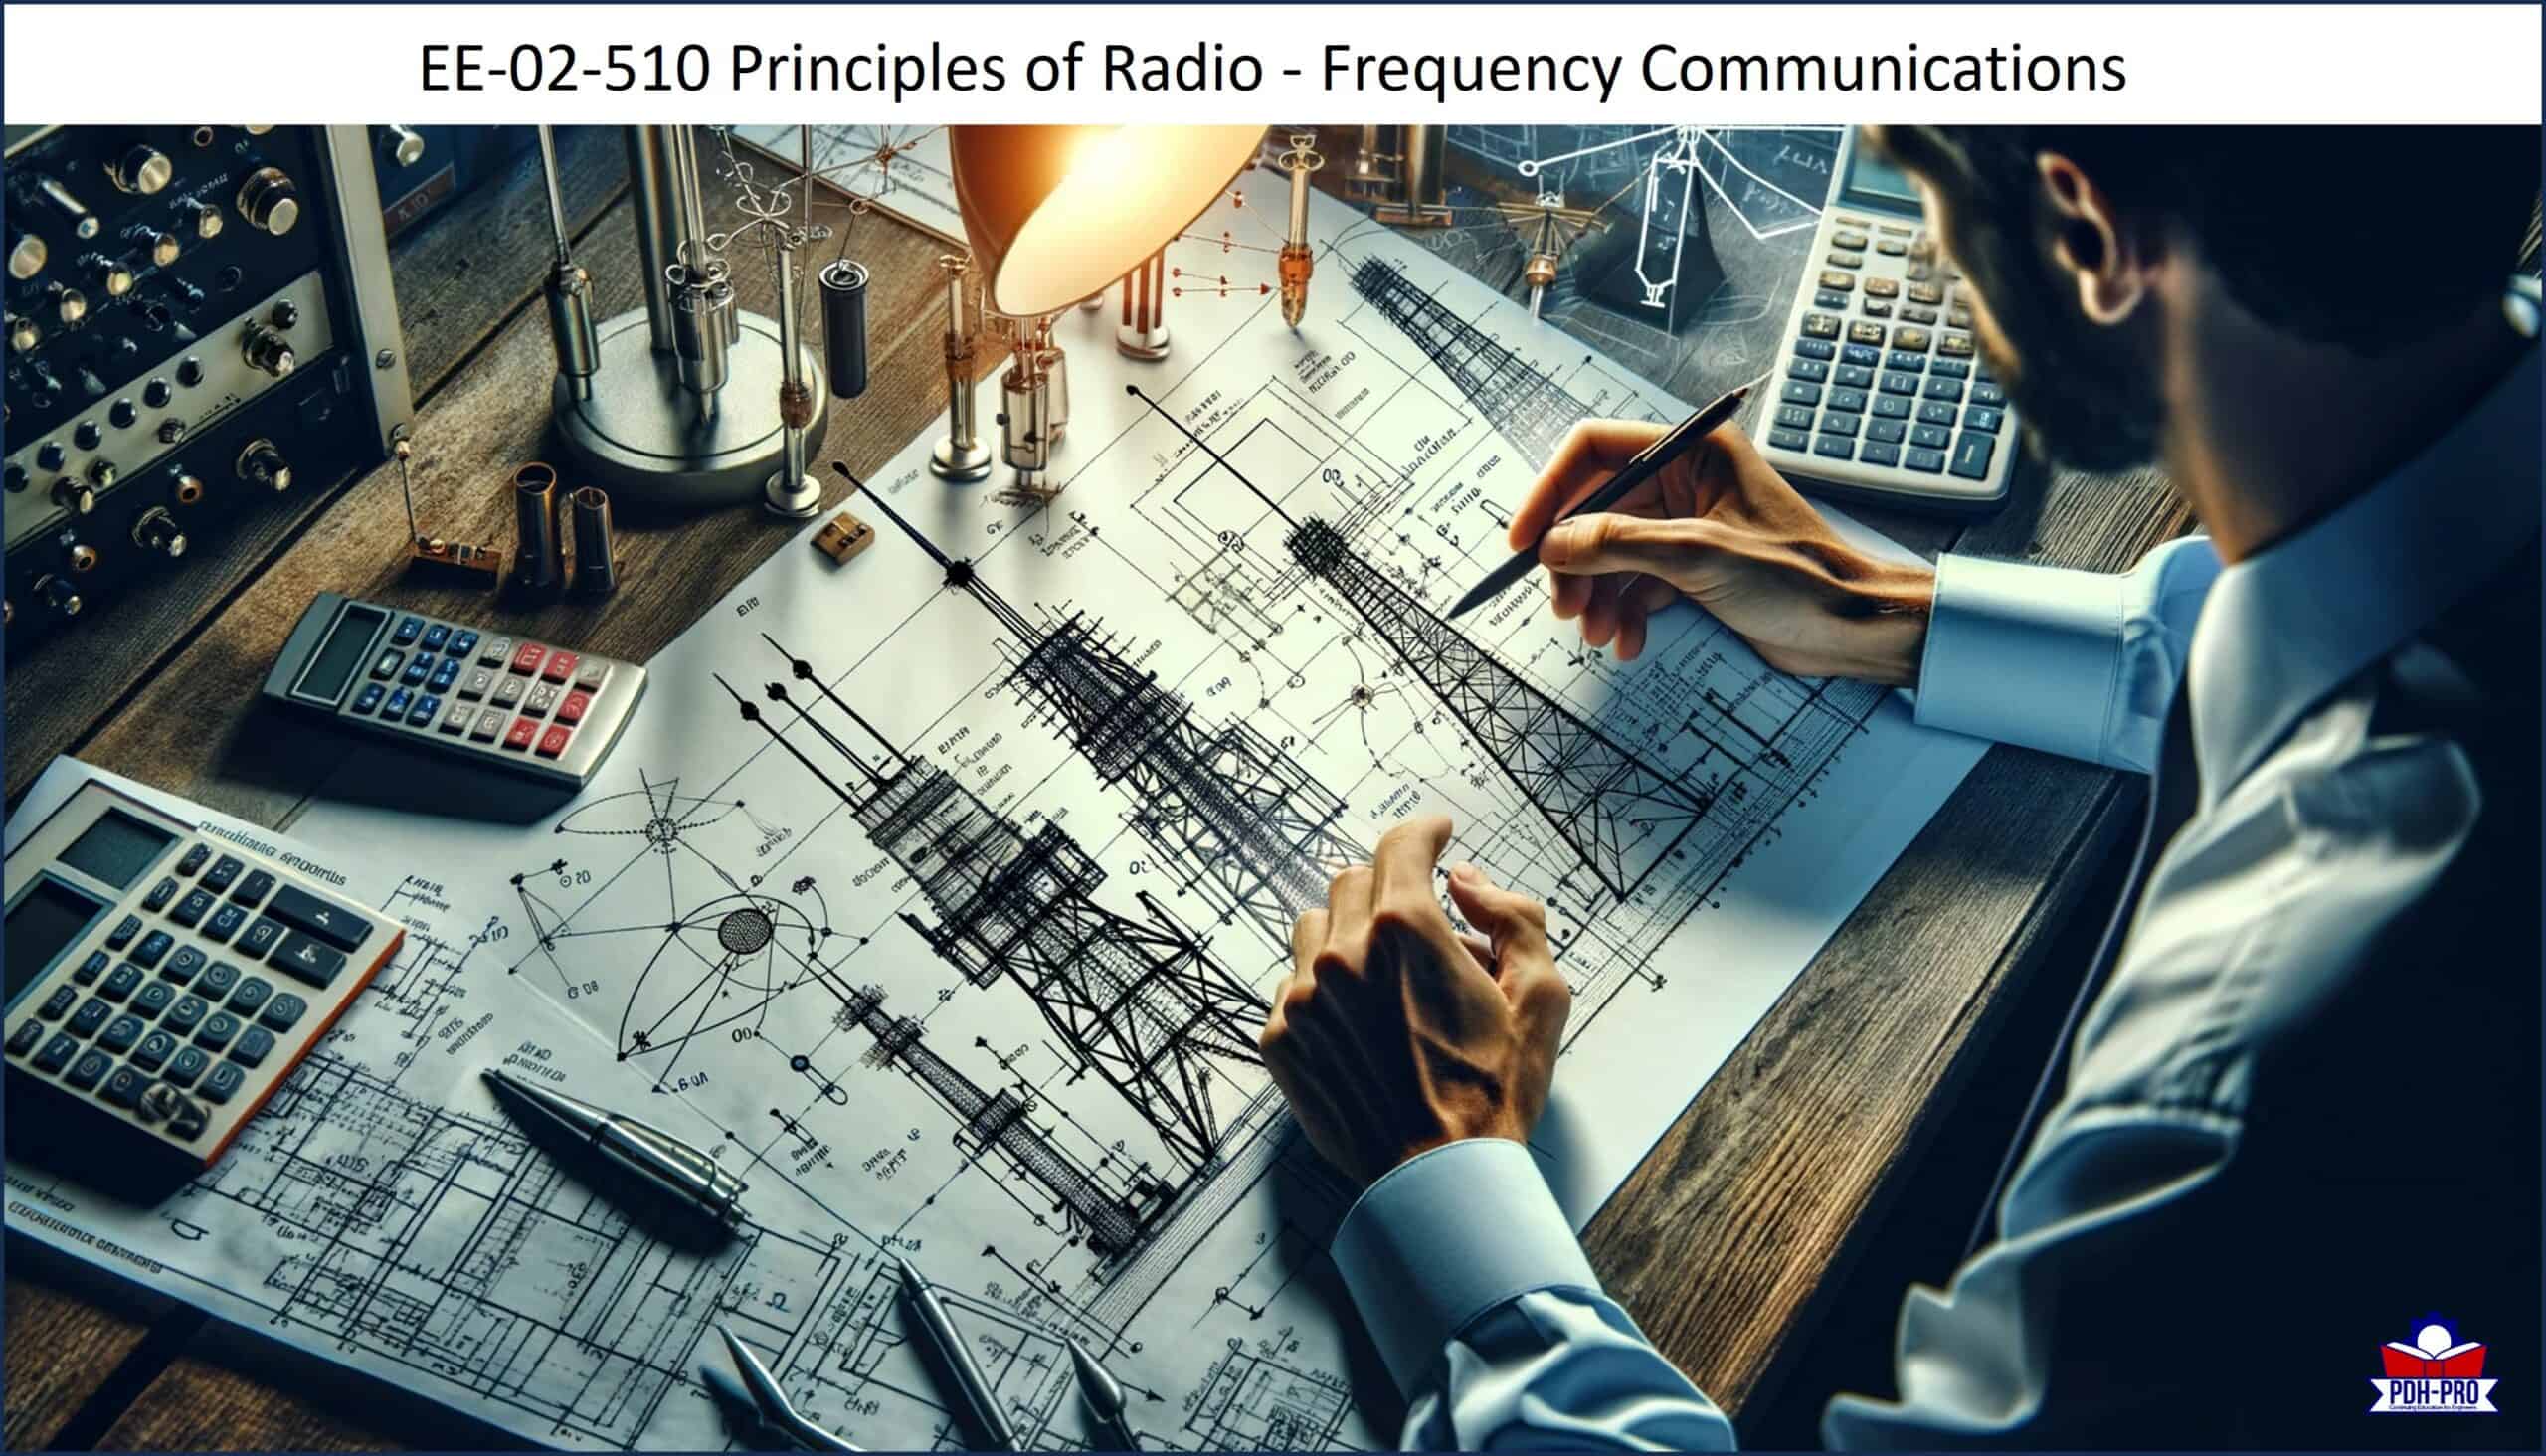 Principles of Radio - Frequency Communications